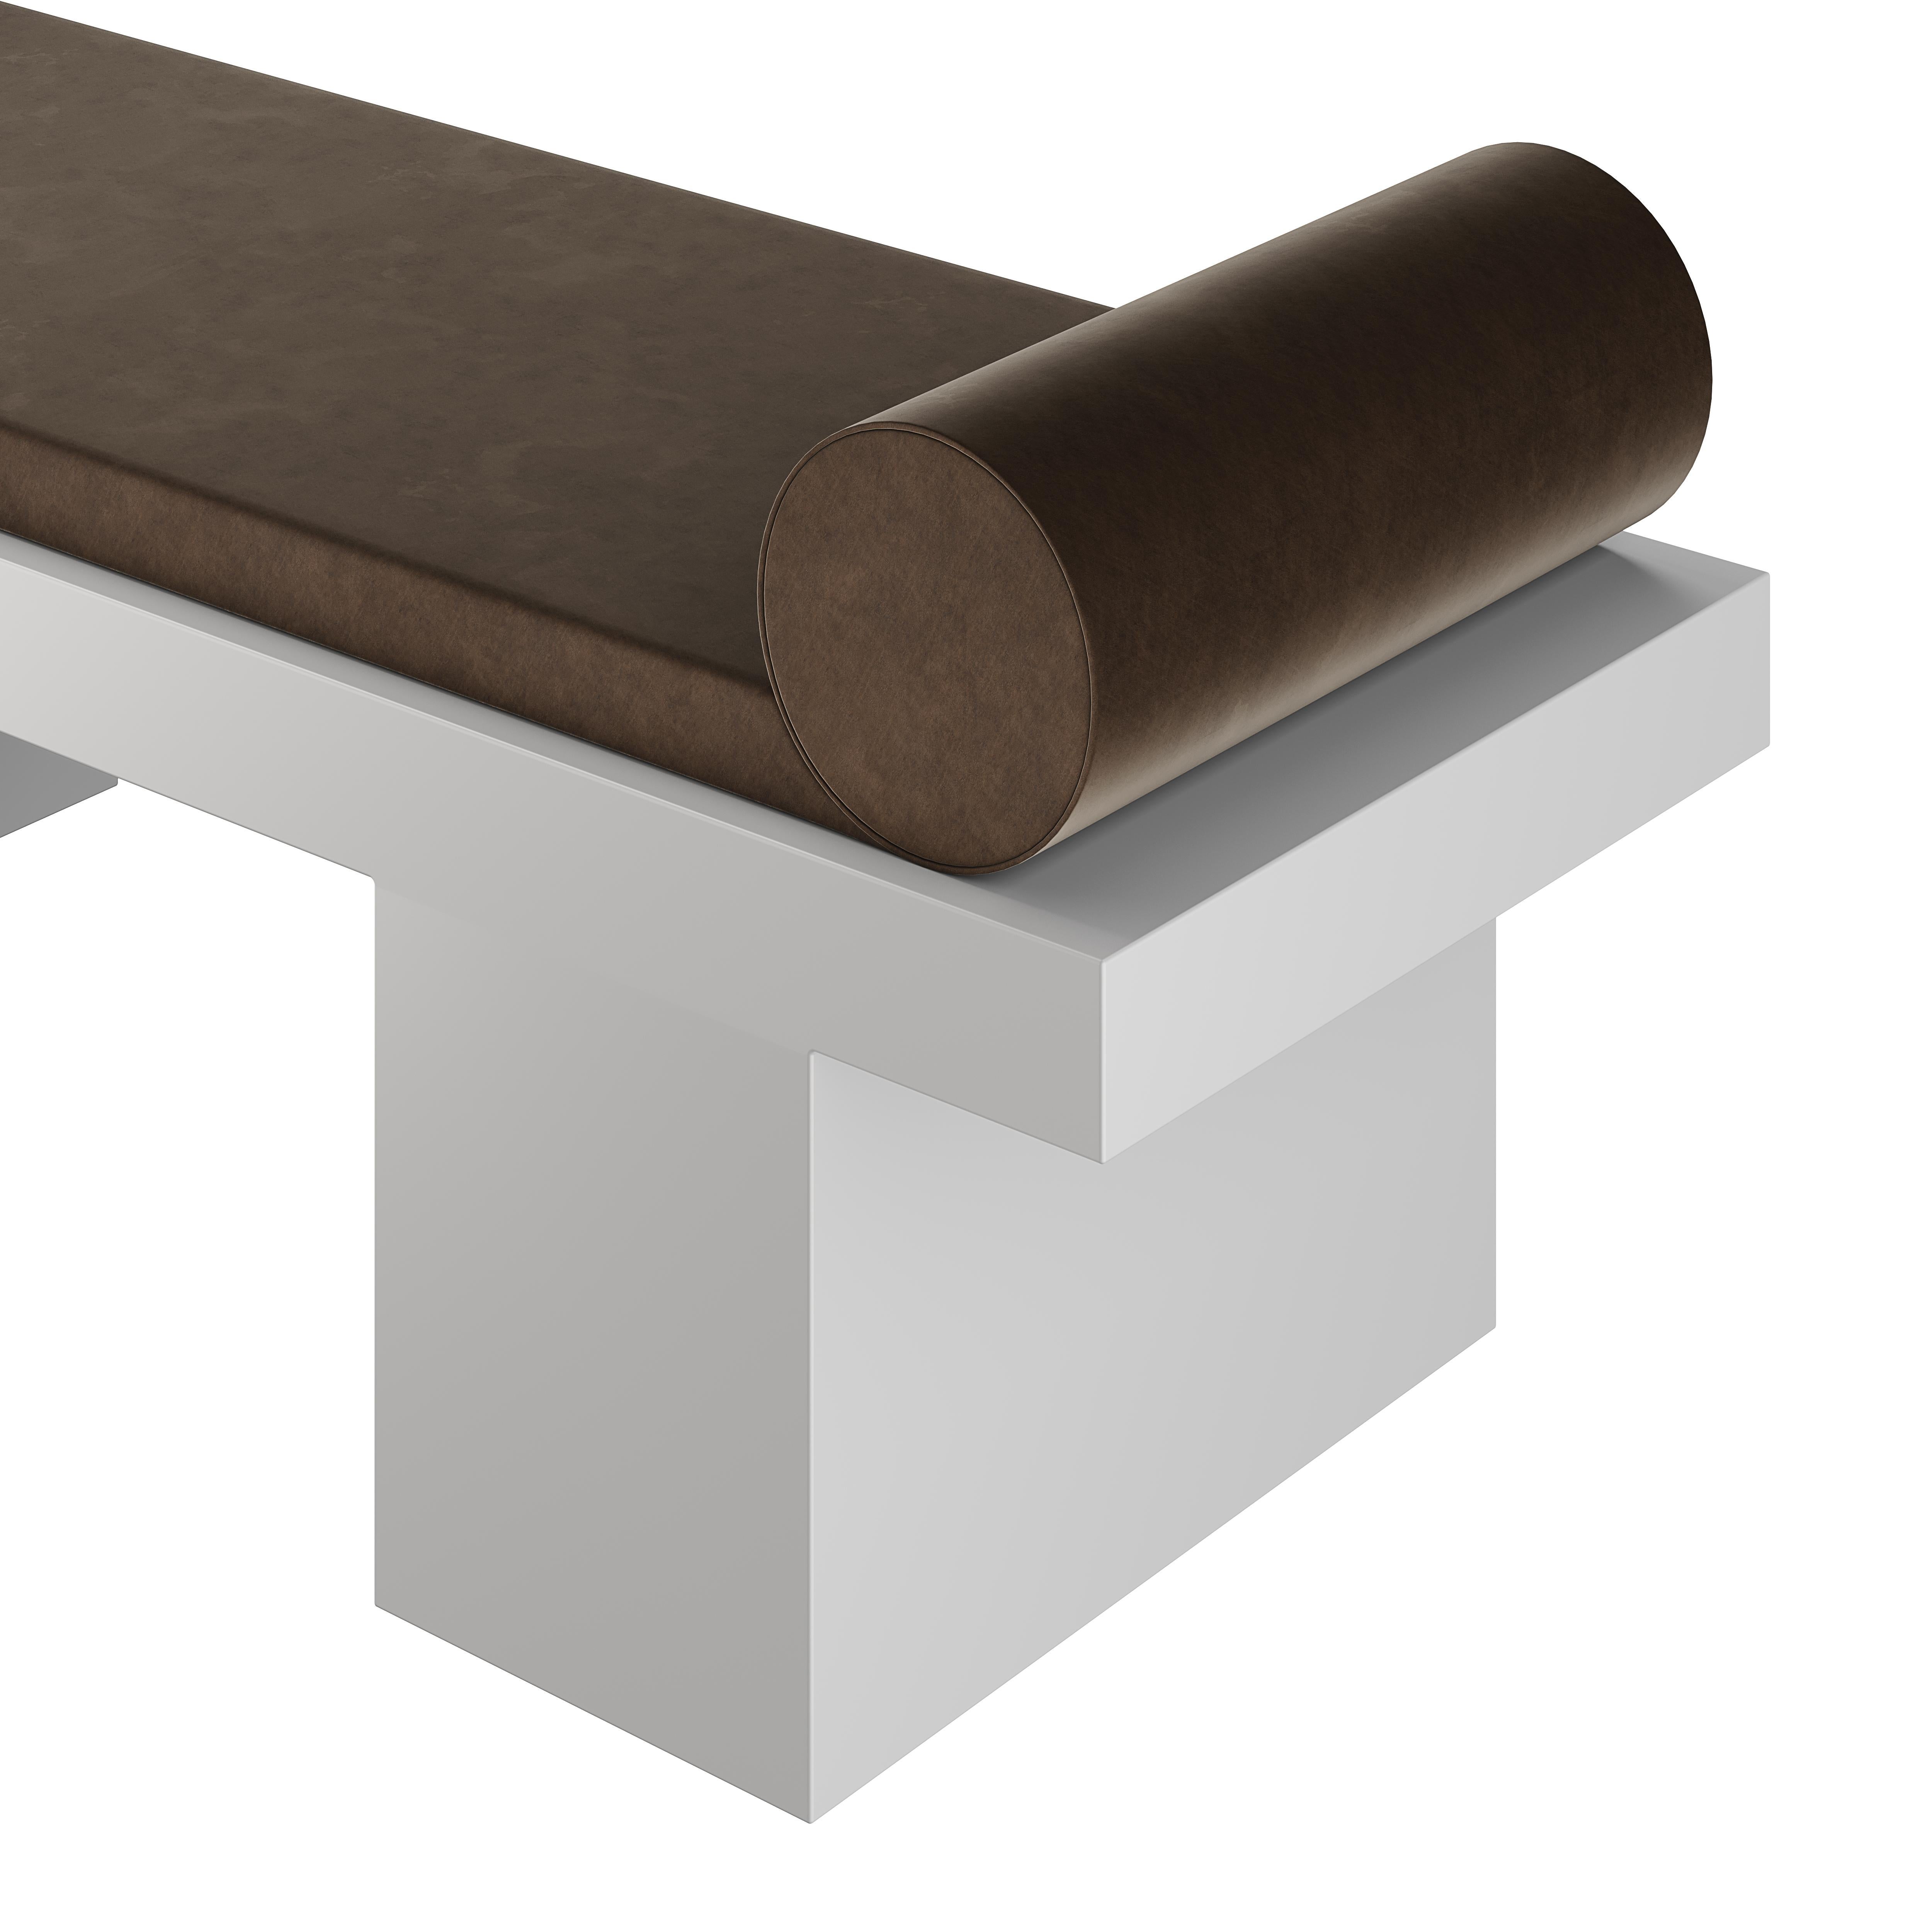 Hand-Crafted Modern Brutalist Style Bench Grey Matte Lacquer Upholstery in Suede Brown For Sale